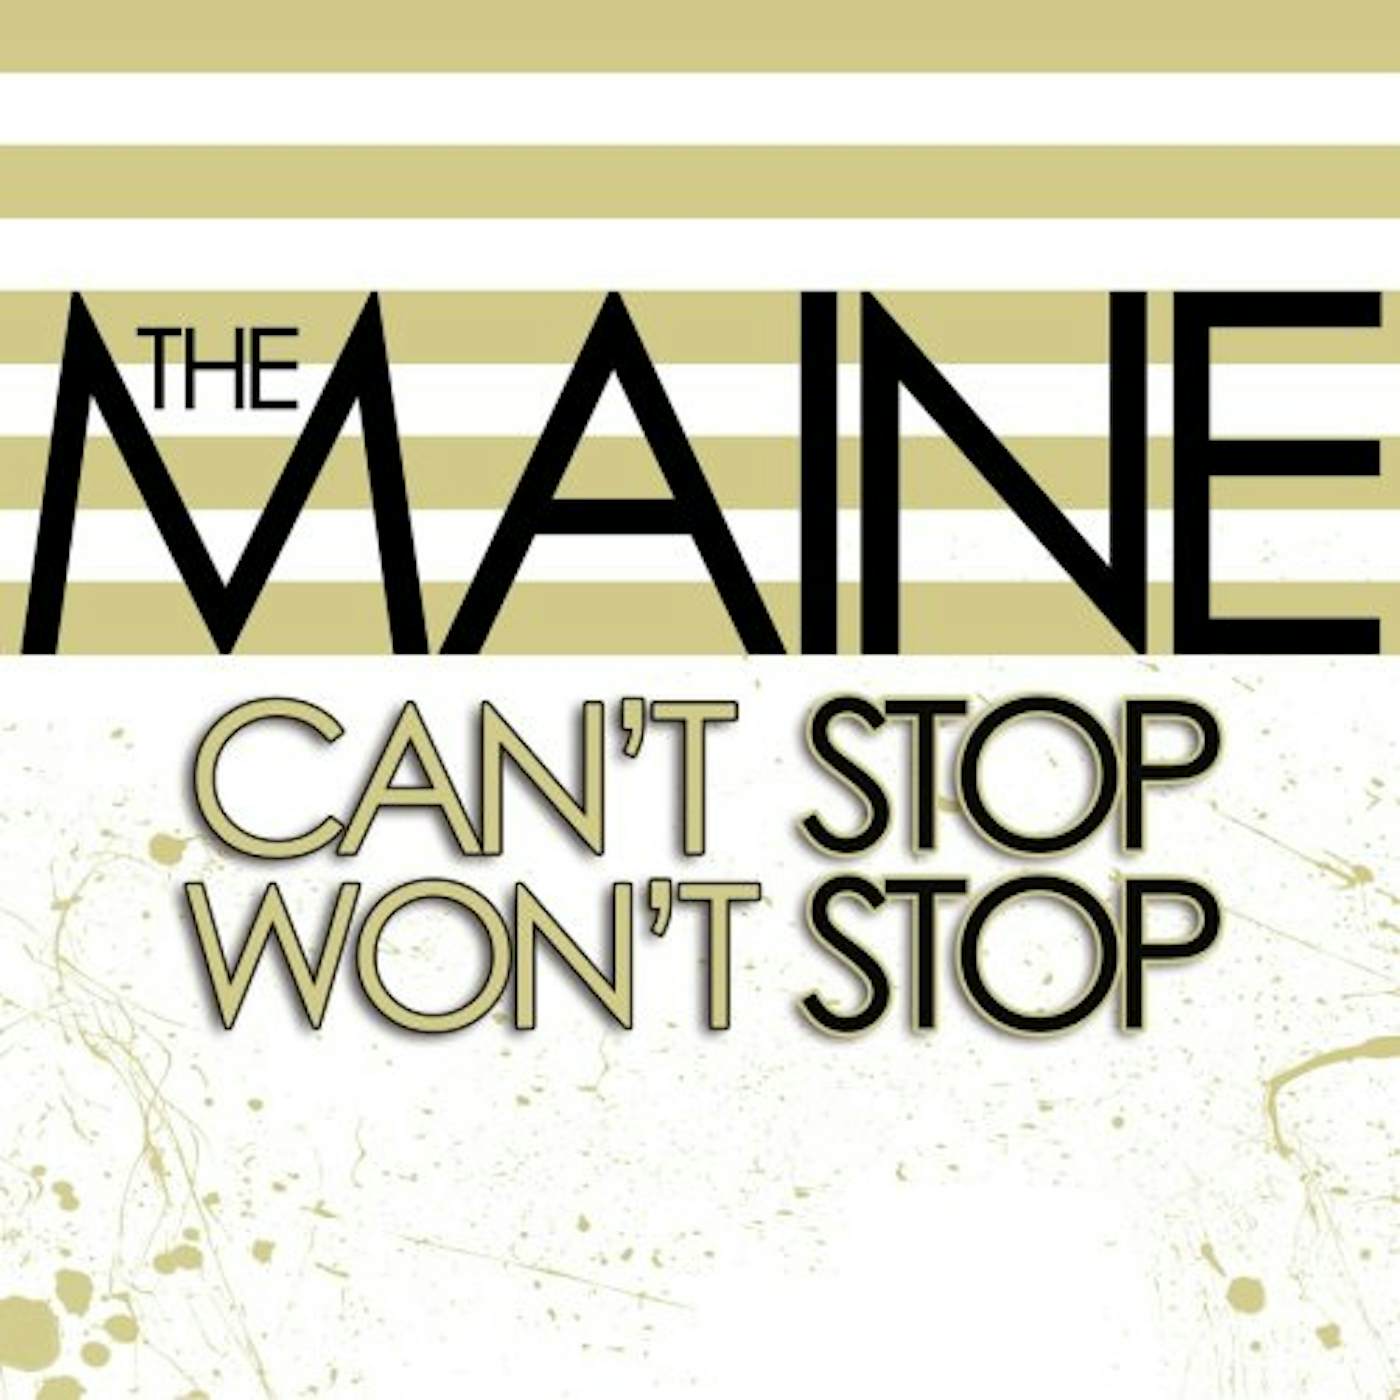 The Maine CAN'T STOP WON'T STOP CD